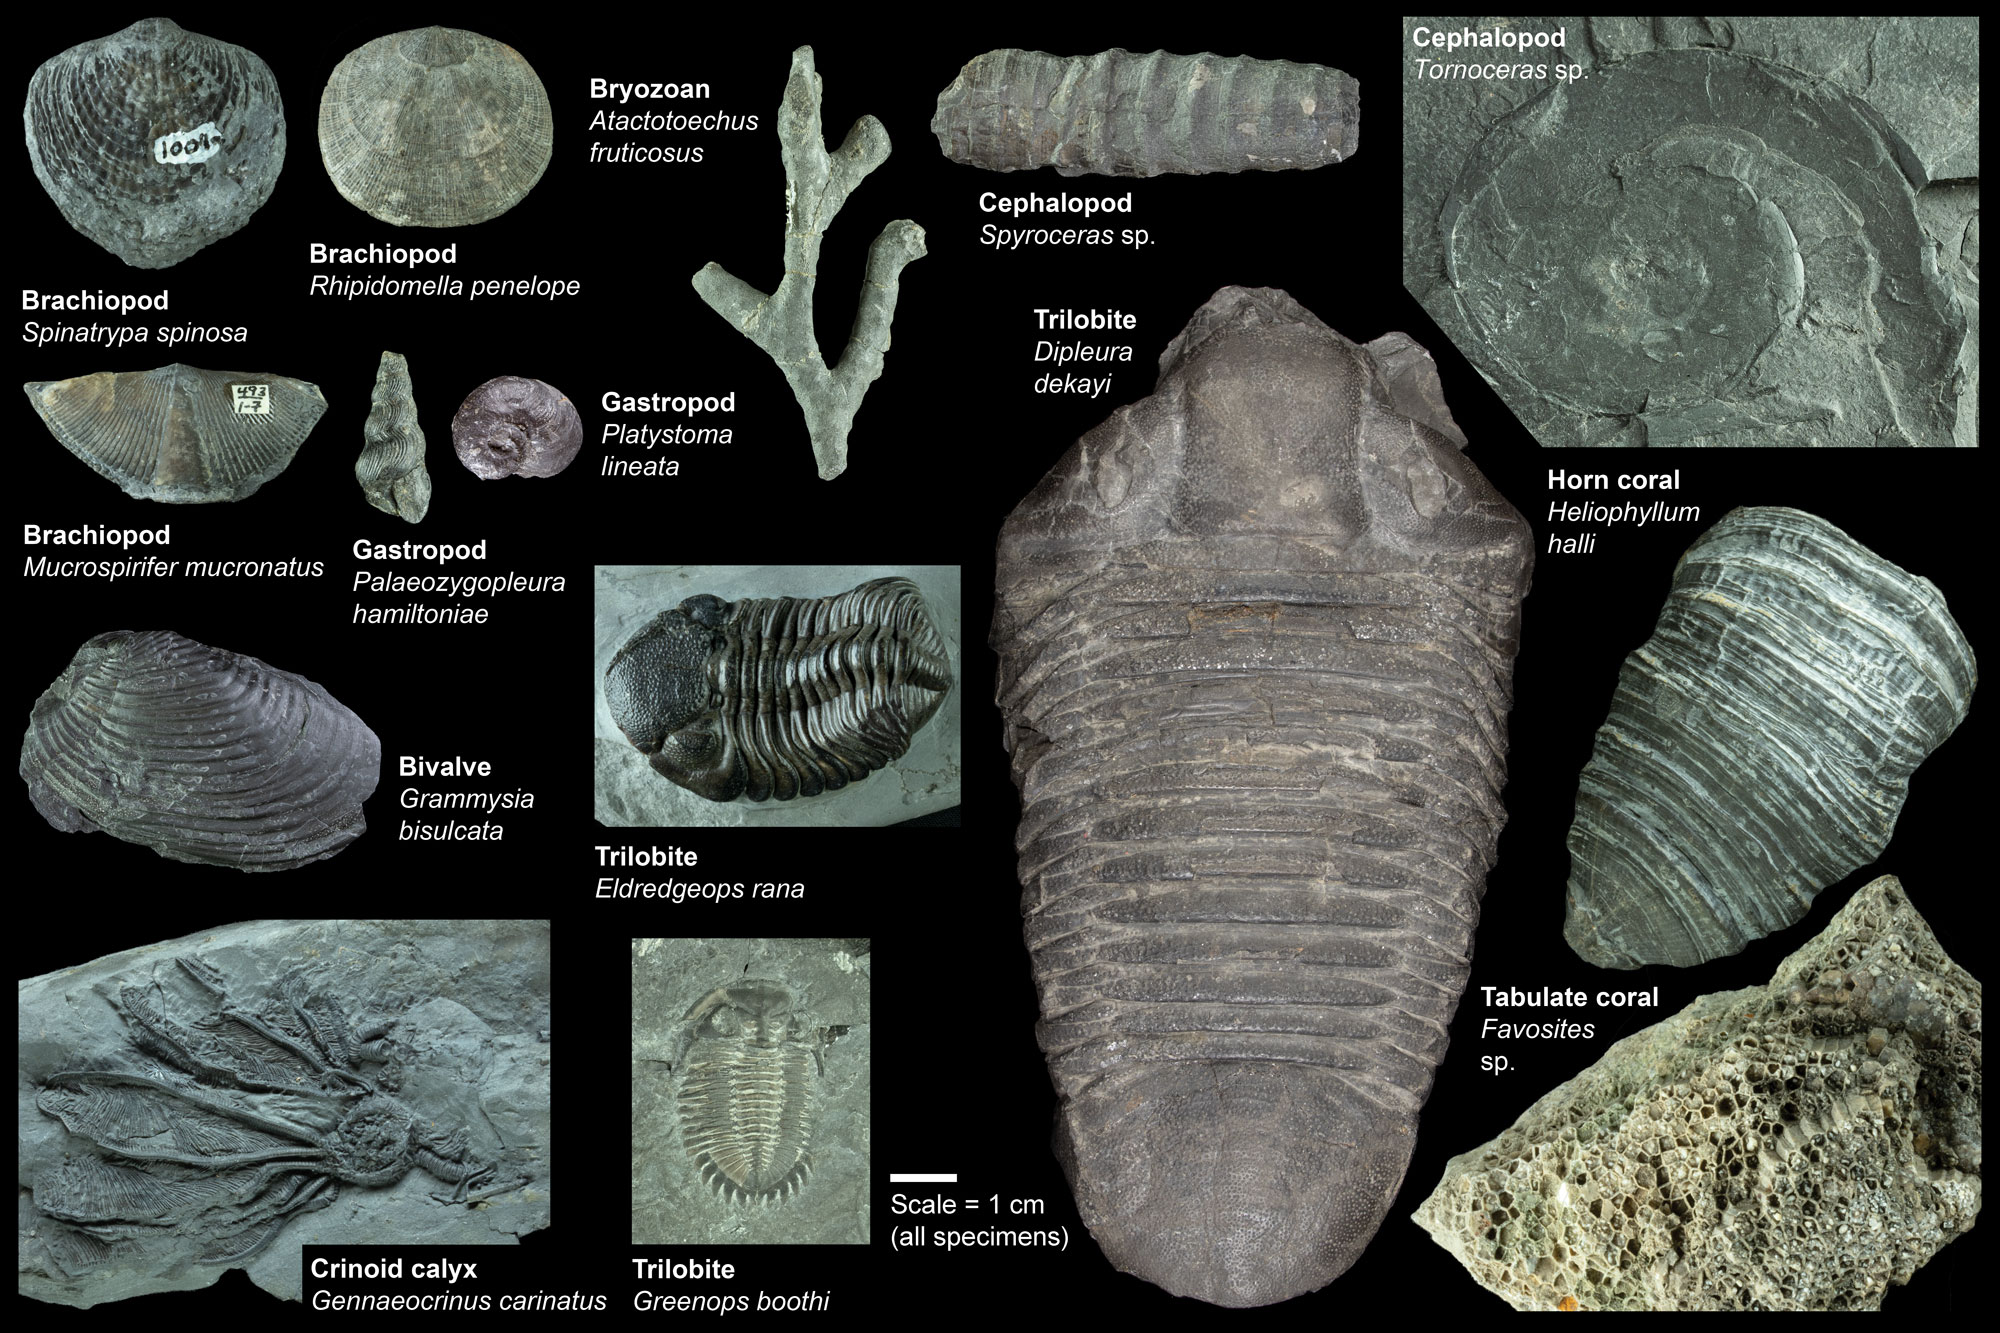 Image showing a diverse assortment of Devonian invertebrate fossils from New York State.